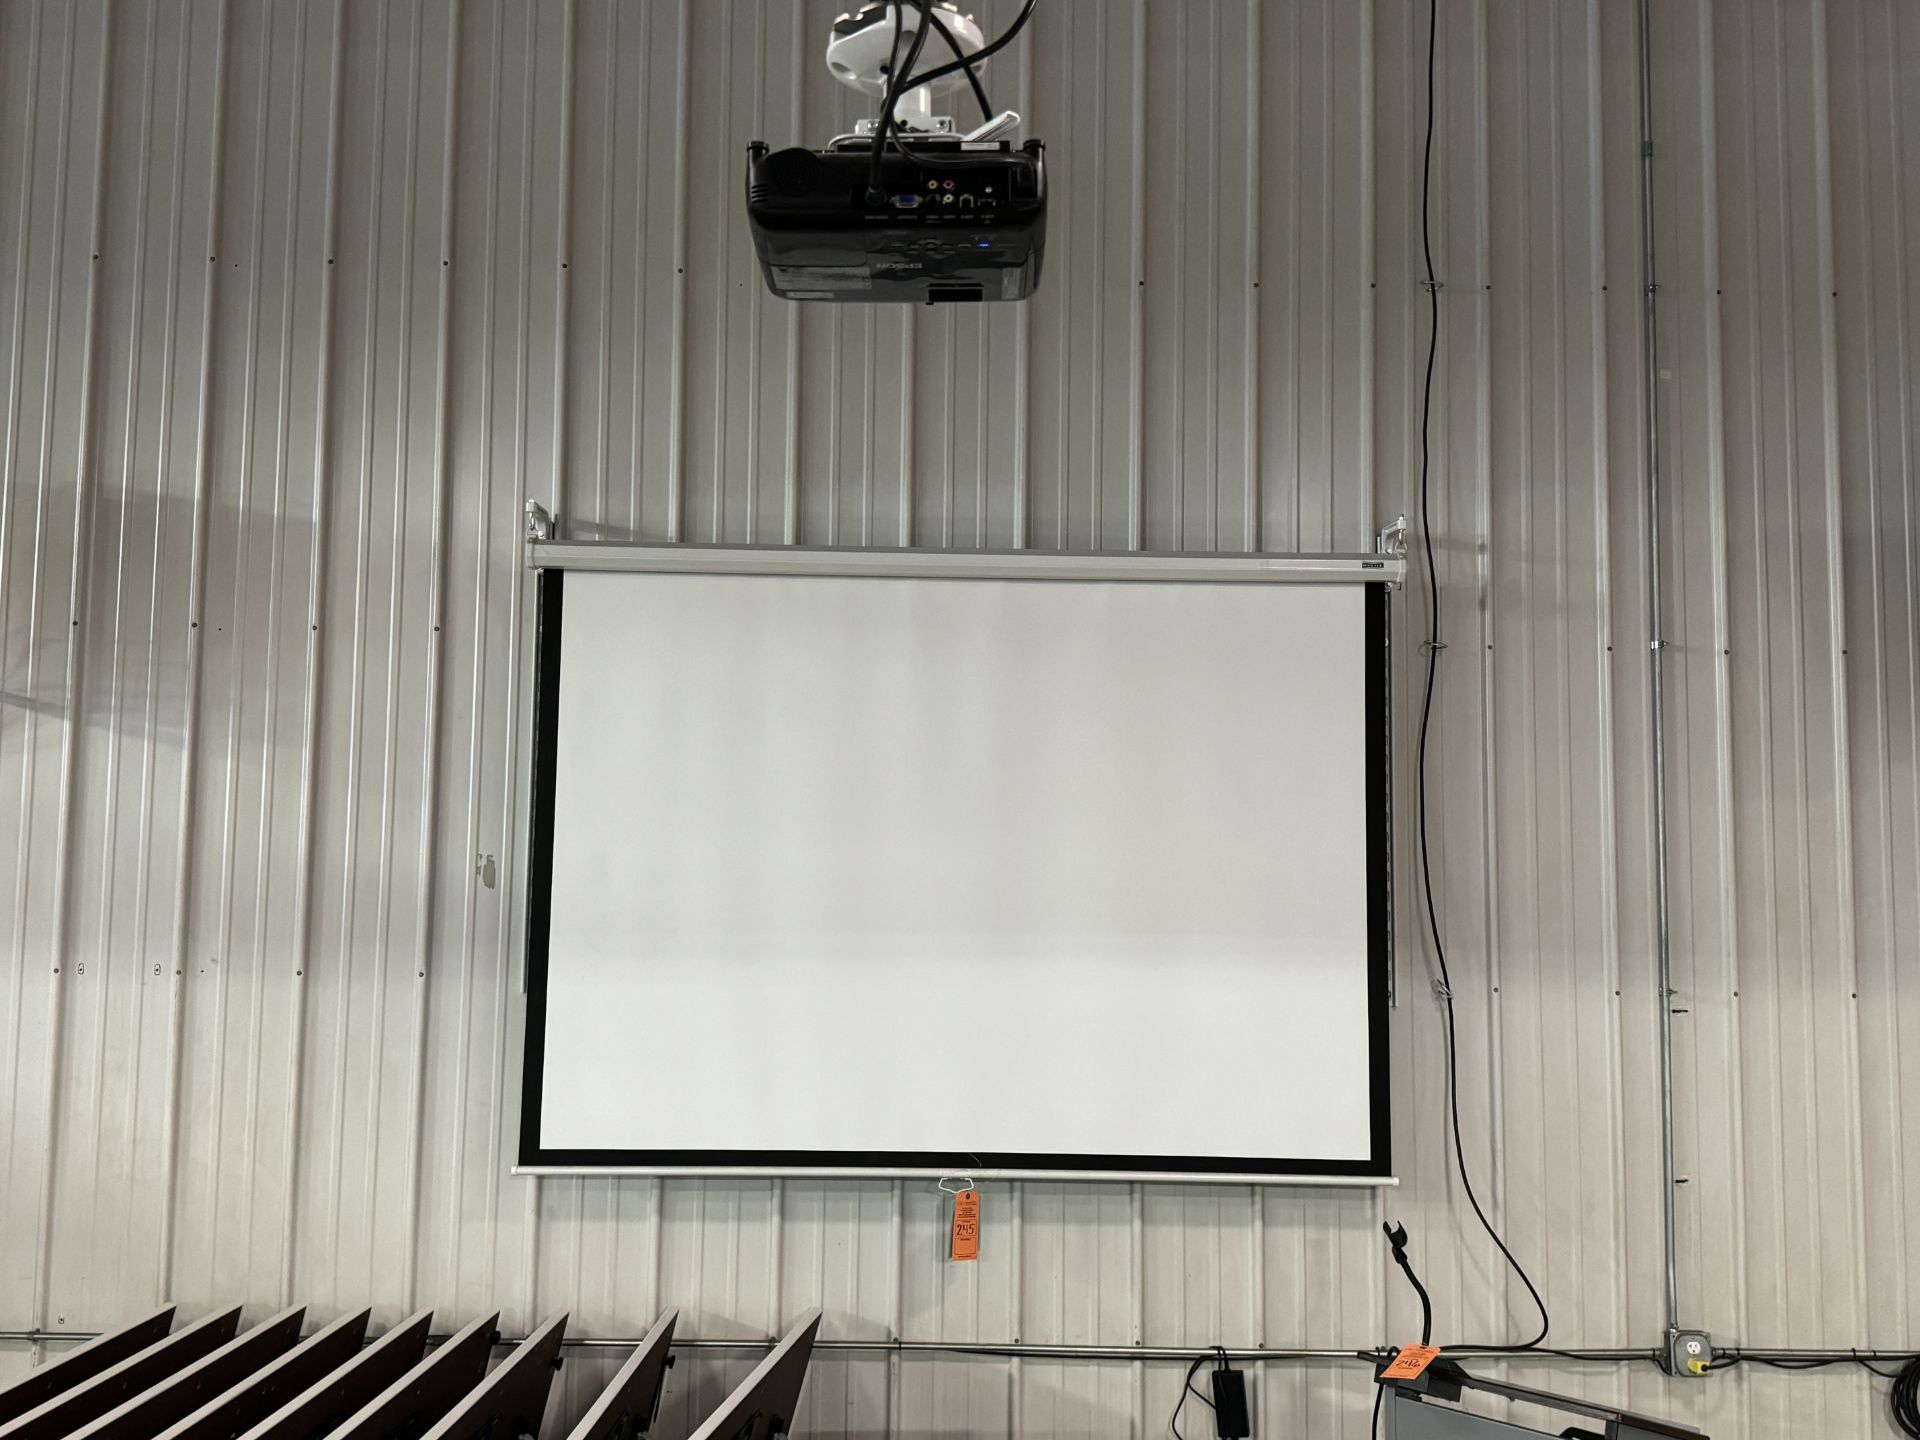 EPSON EX7230 PROJECTOR AND SCREEN (ZONE B1)